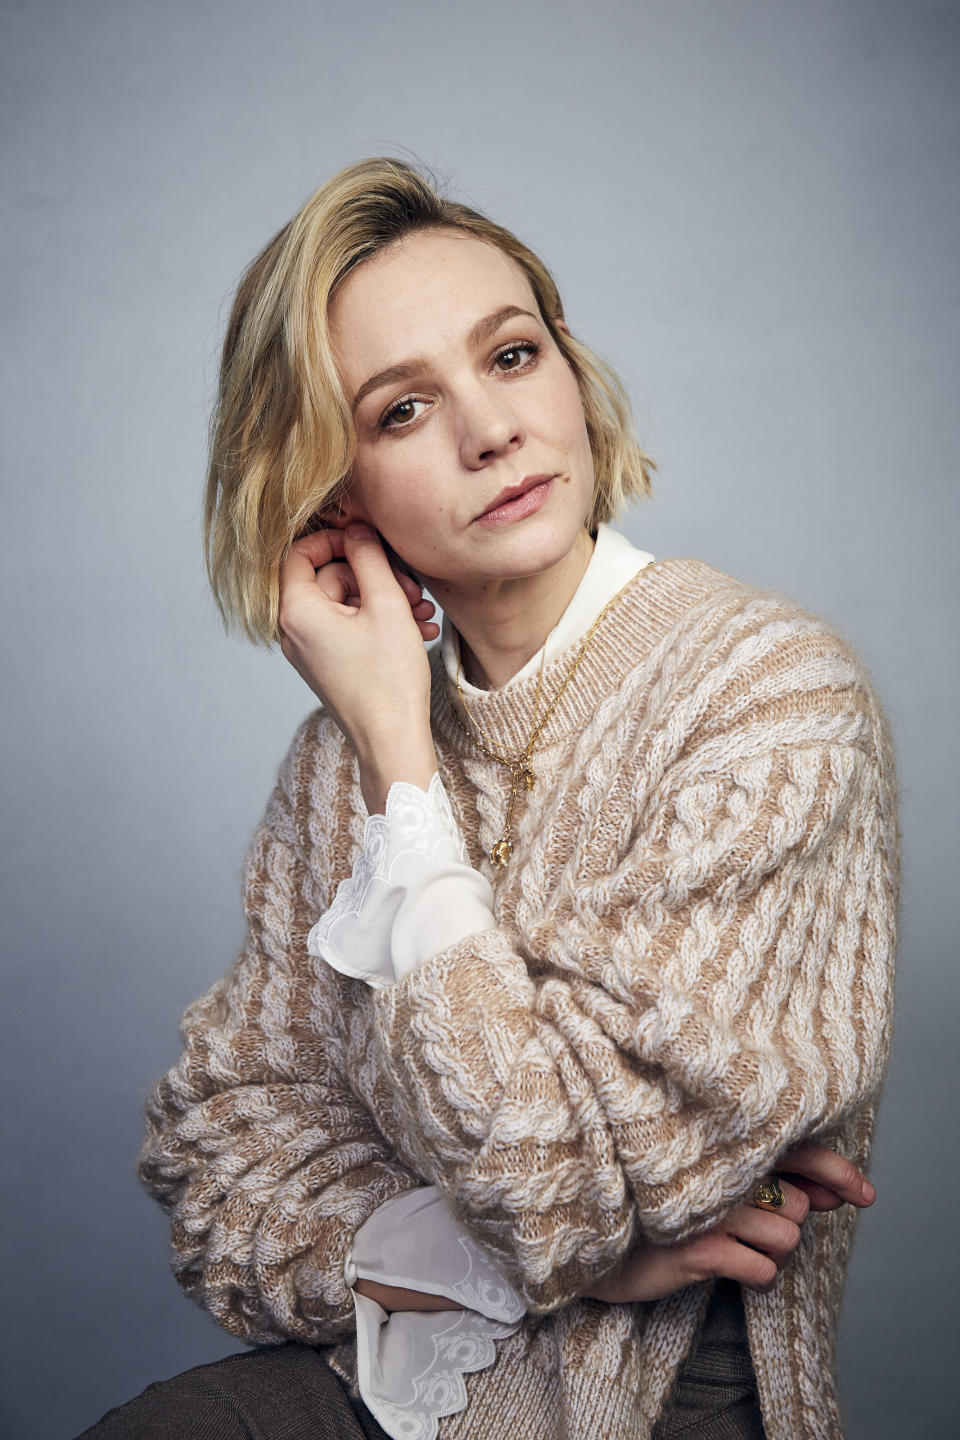 FILE - Carey Mulligan poses for a portrait to promote the film "Promising Young Woman" during the Sundance Film Festival in Park City, Utah on Jan. 25, 2020. The film is nominated for an Oscar for best picture and Mulligan is nominated for best actress. (Photo by Taylor Jewell/Invision/AP)